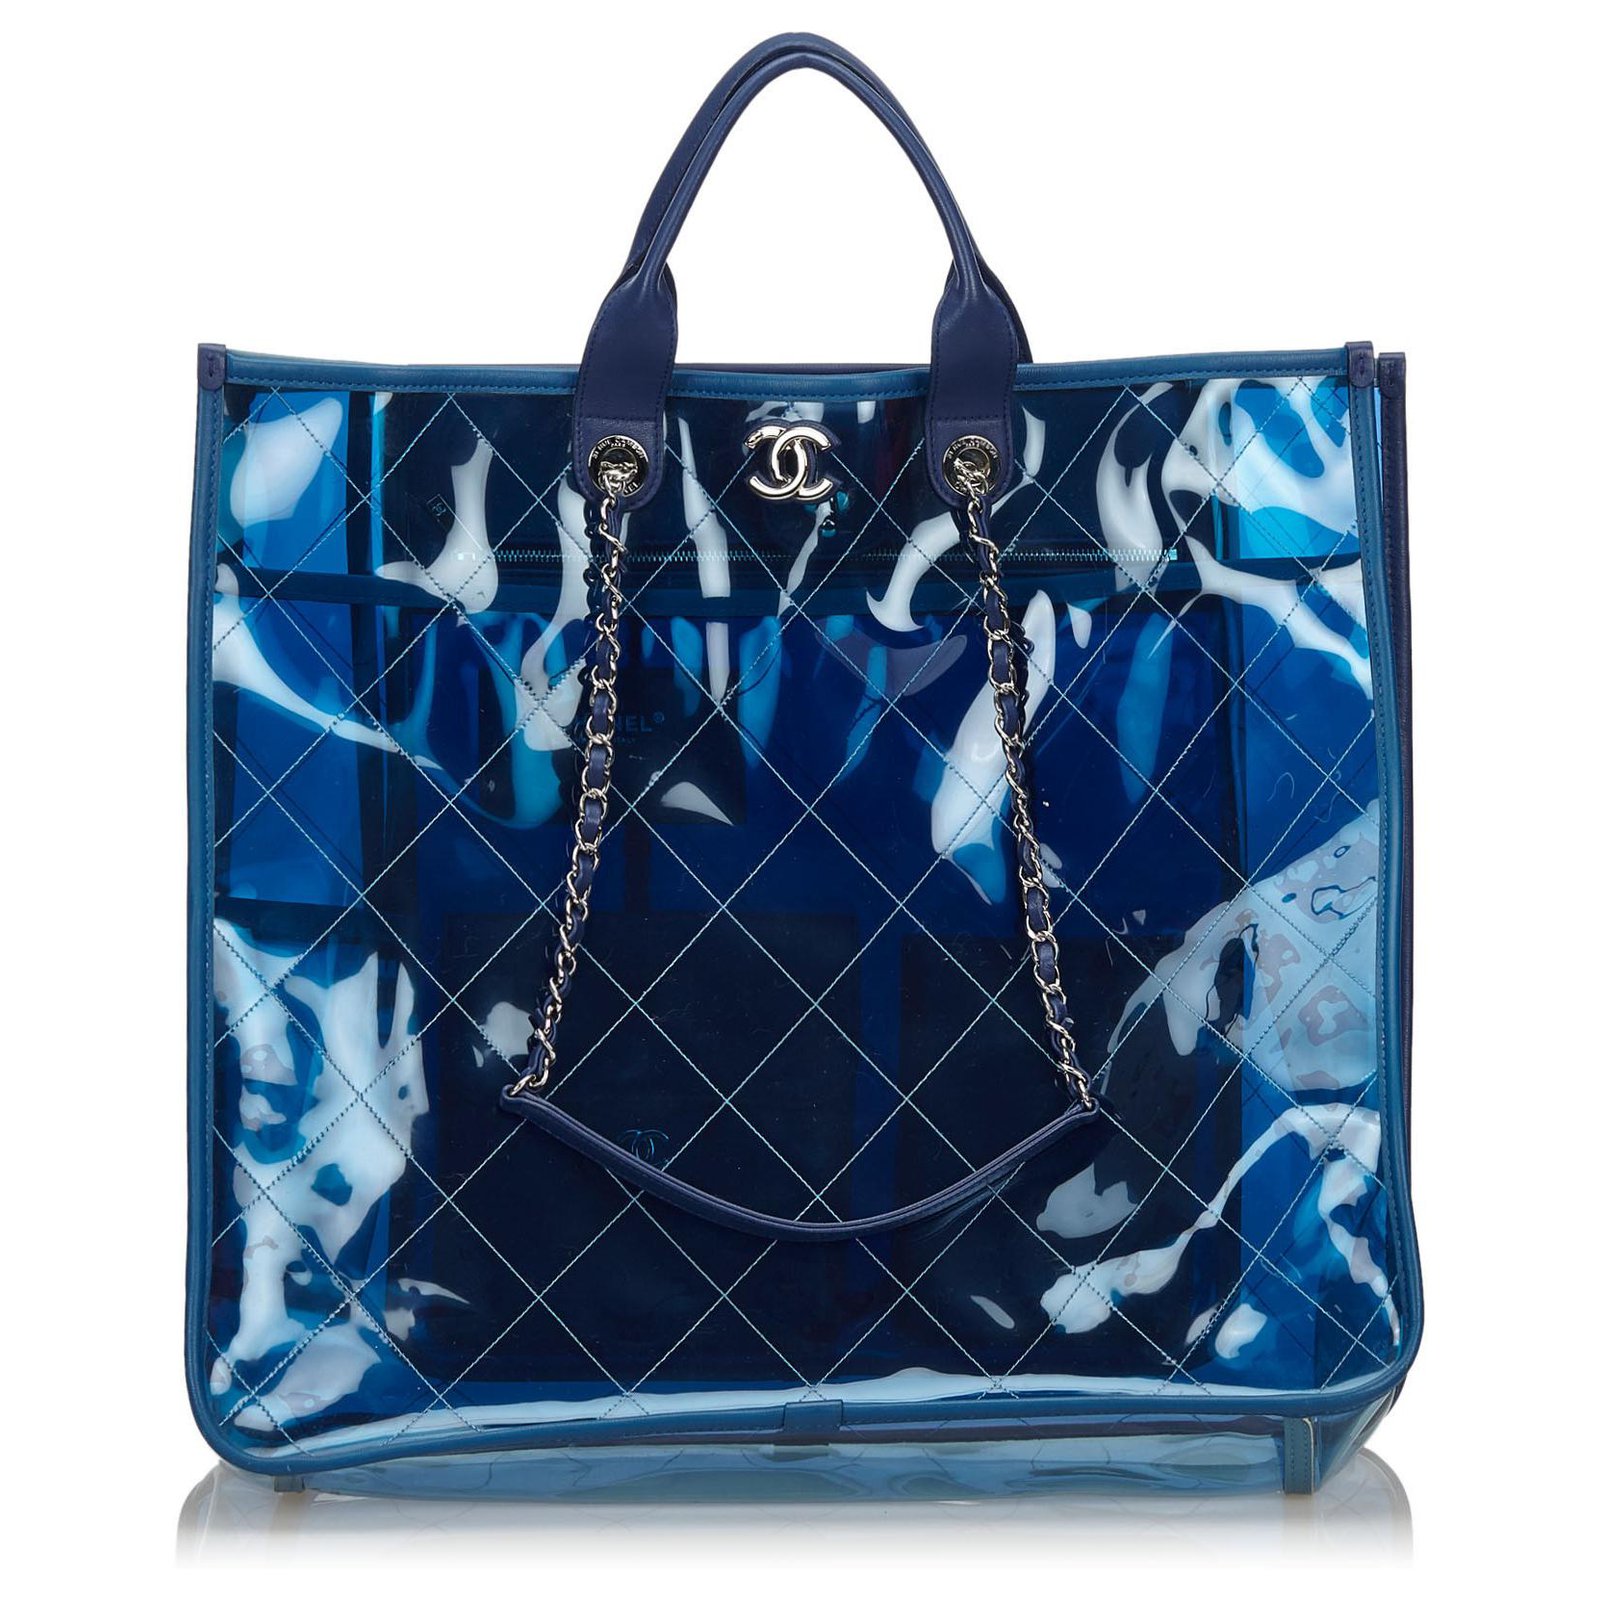 Chanel blue 2018 Quilted PVC Large Coco Splash Shopping Tote